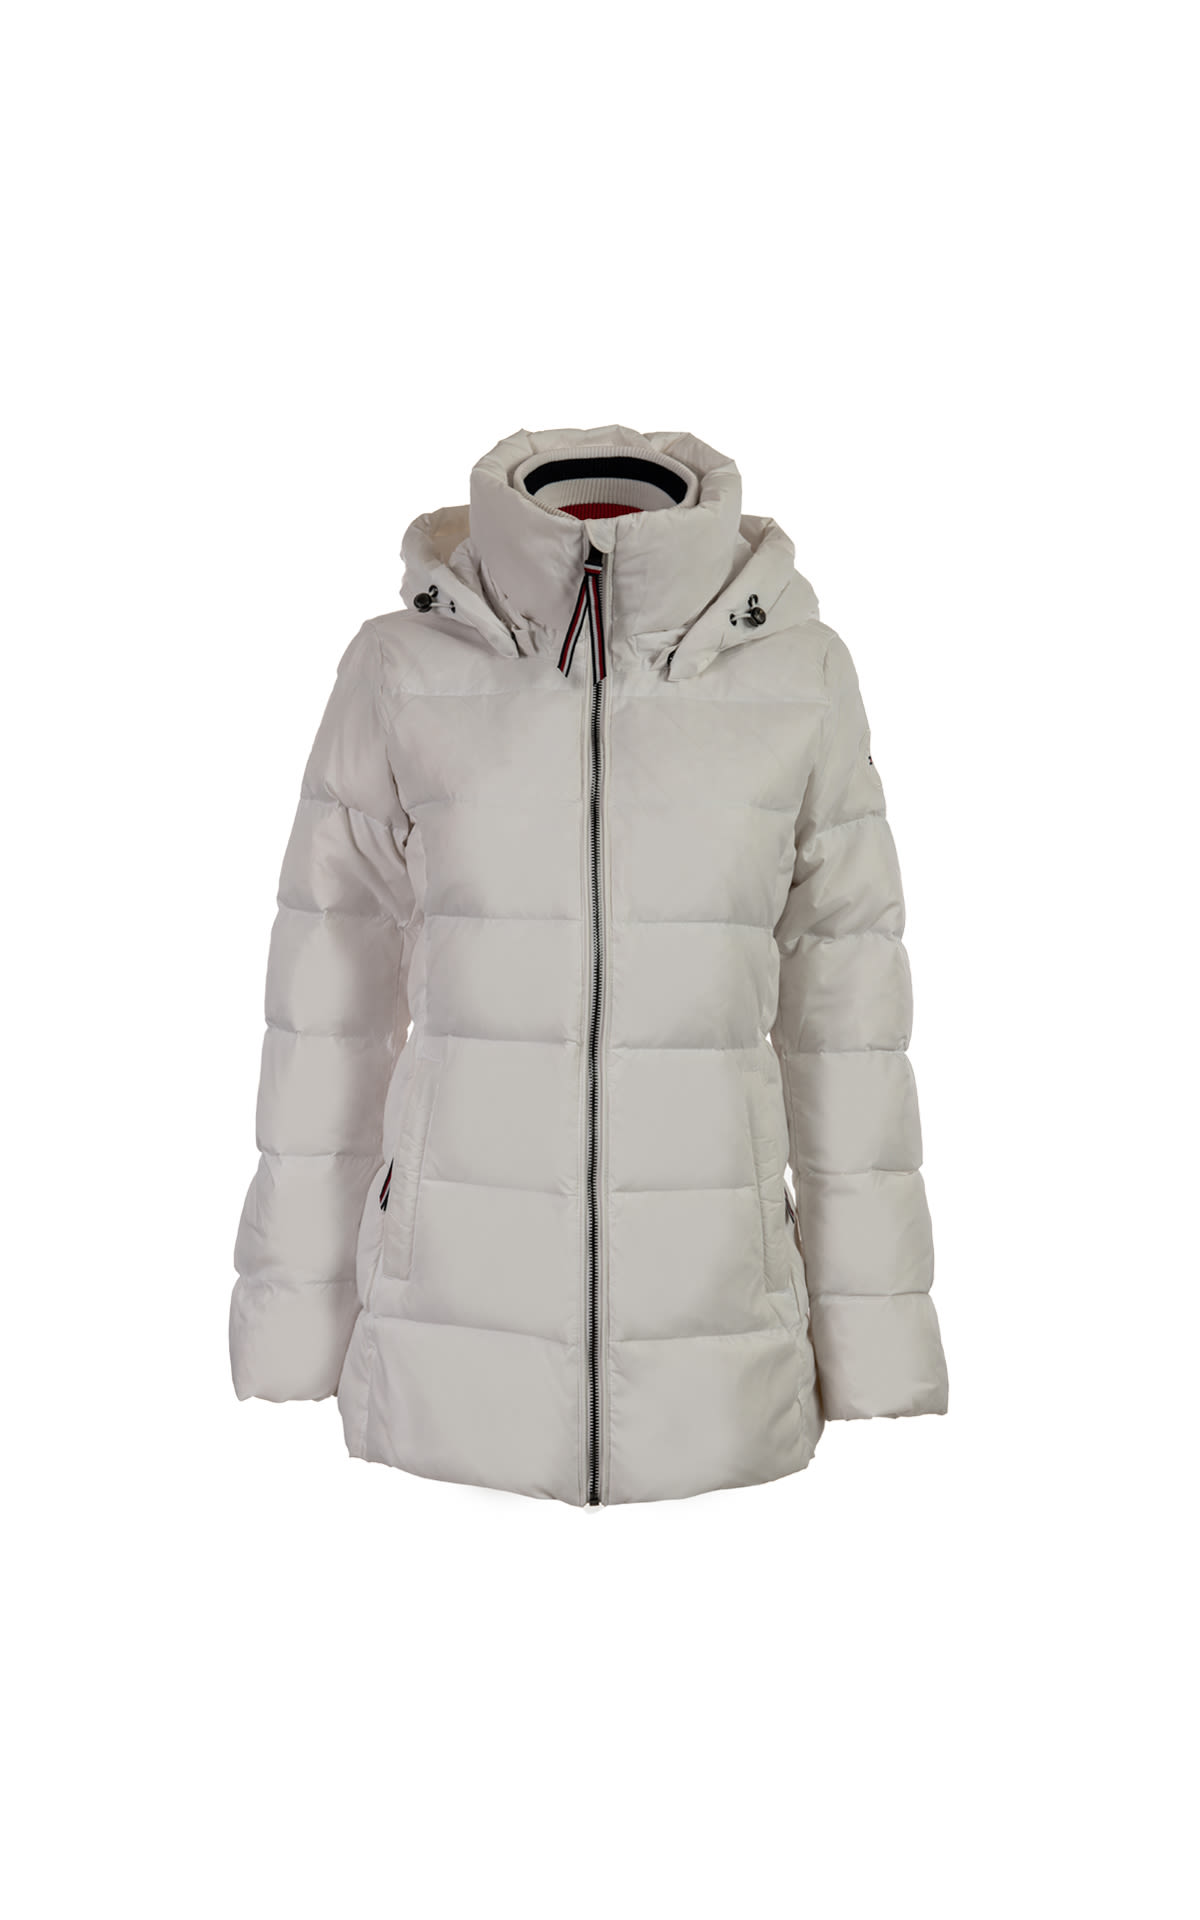  Tommy Hilfiger down jacket with hood